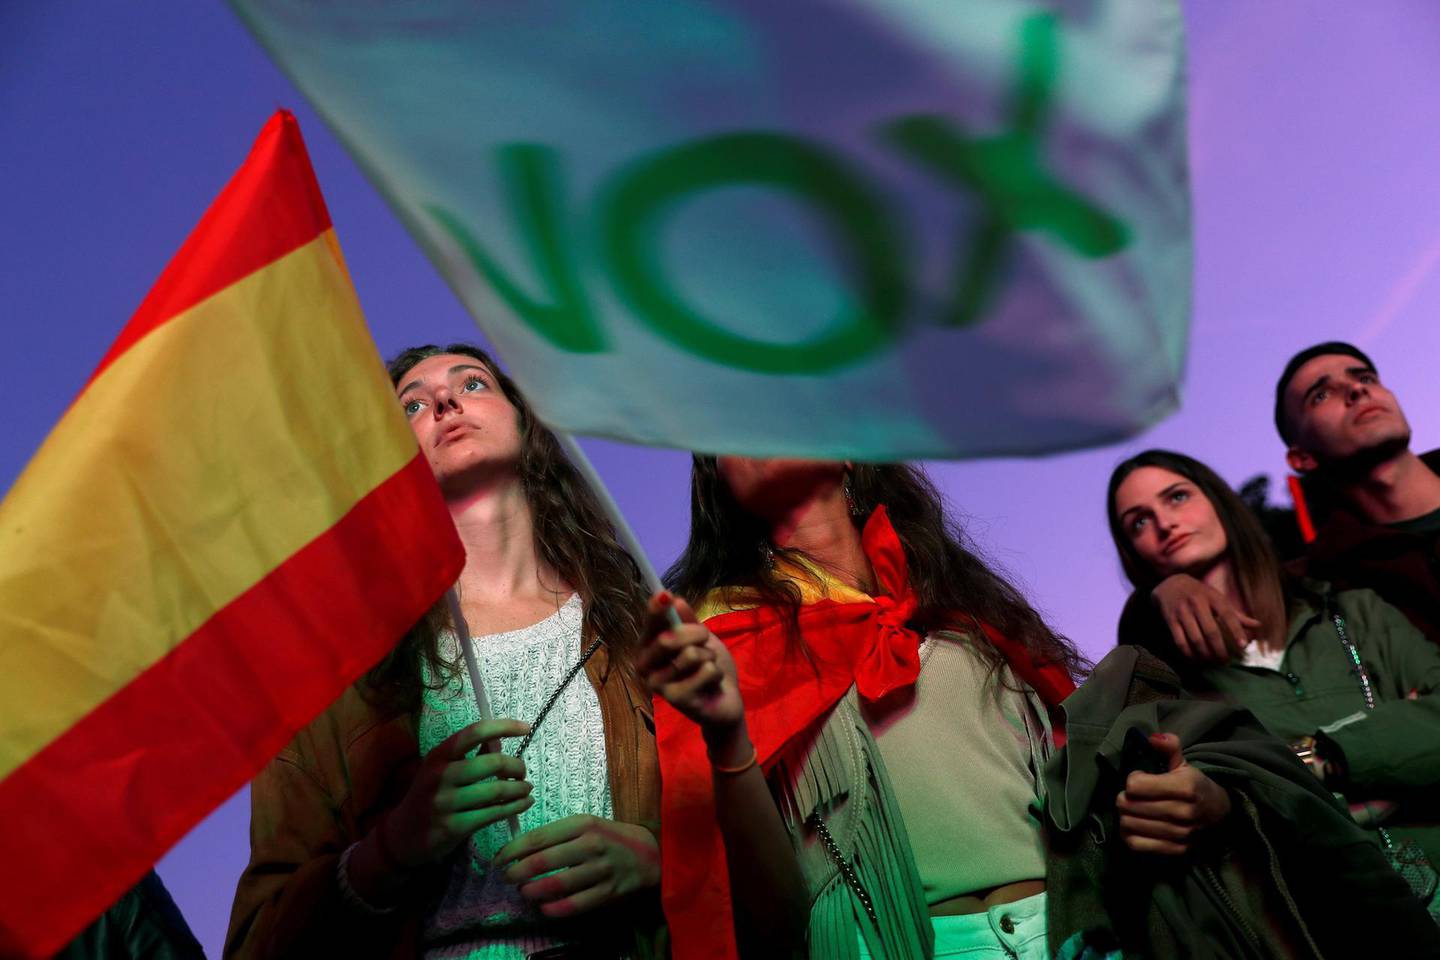 Supporters of Spain's far-right party VOX wait for the announcement of the results in Spain's general election in Madrid, Spain, April 28, 2019. REUTERS/Susana Vera  TPX IMAGES OF THE DAY